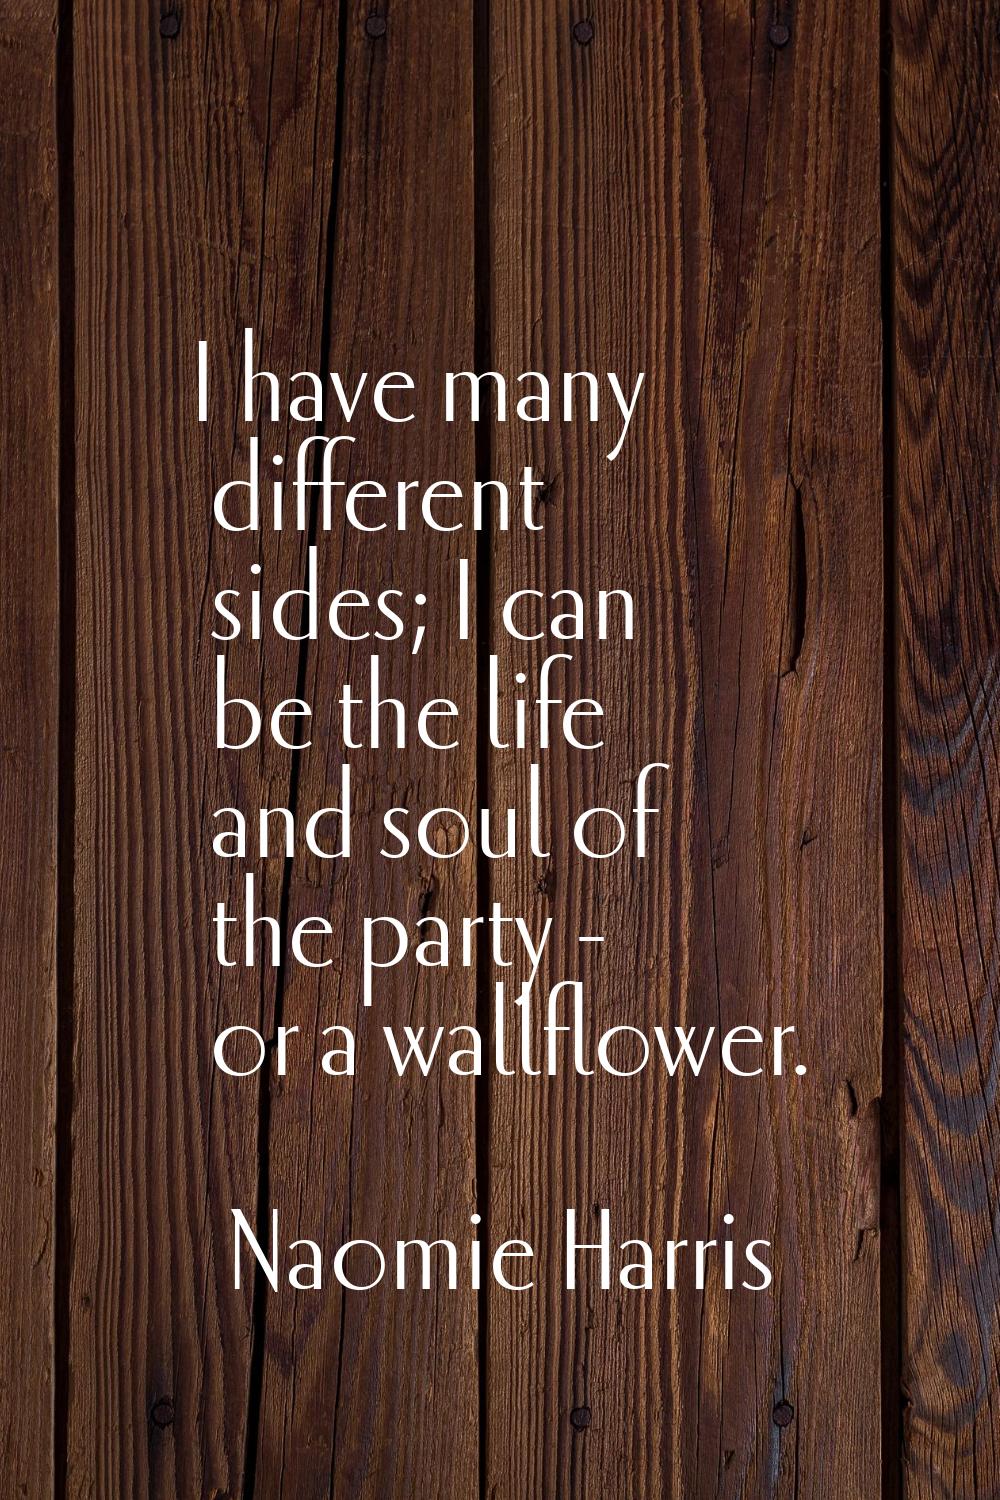 I have many different sides; I can be the life and soul of the party - or a wallflower.